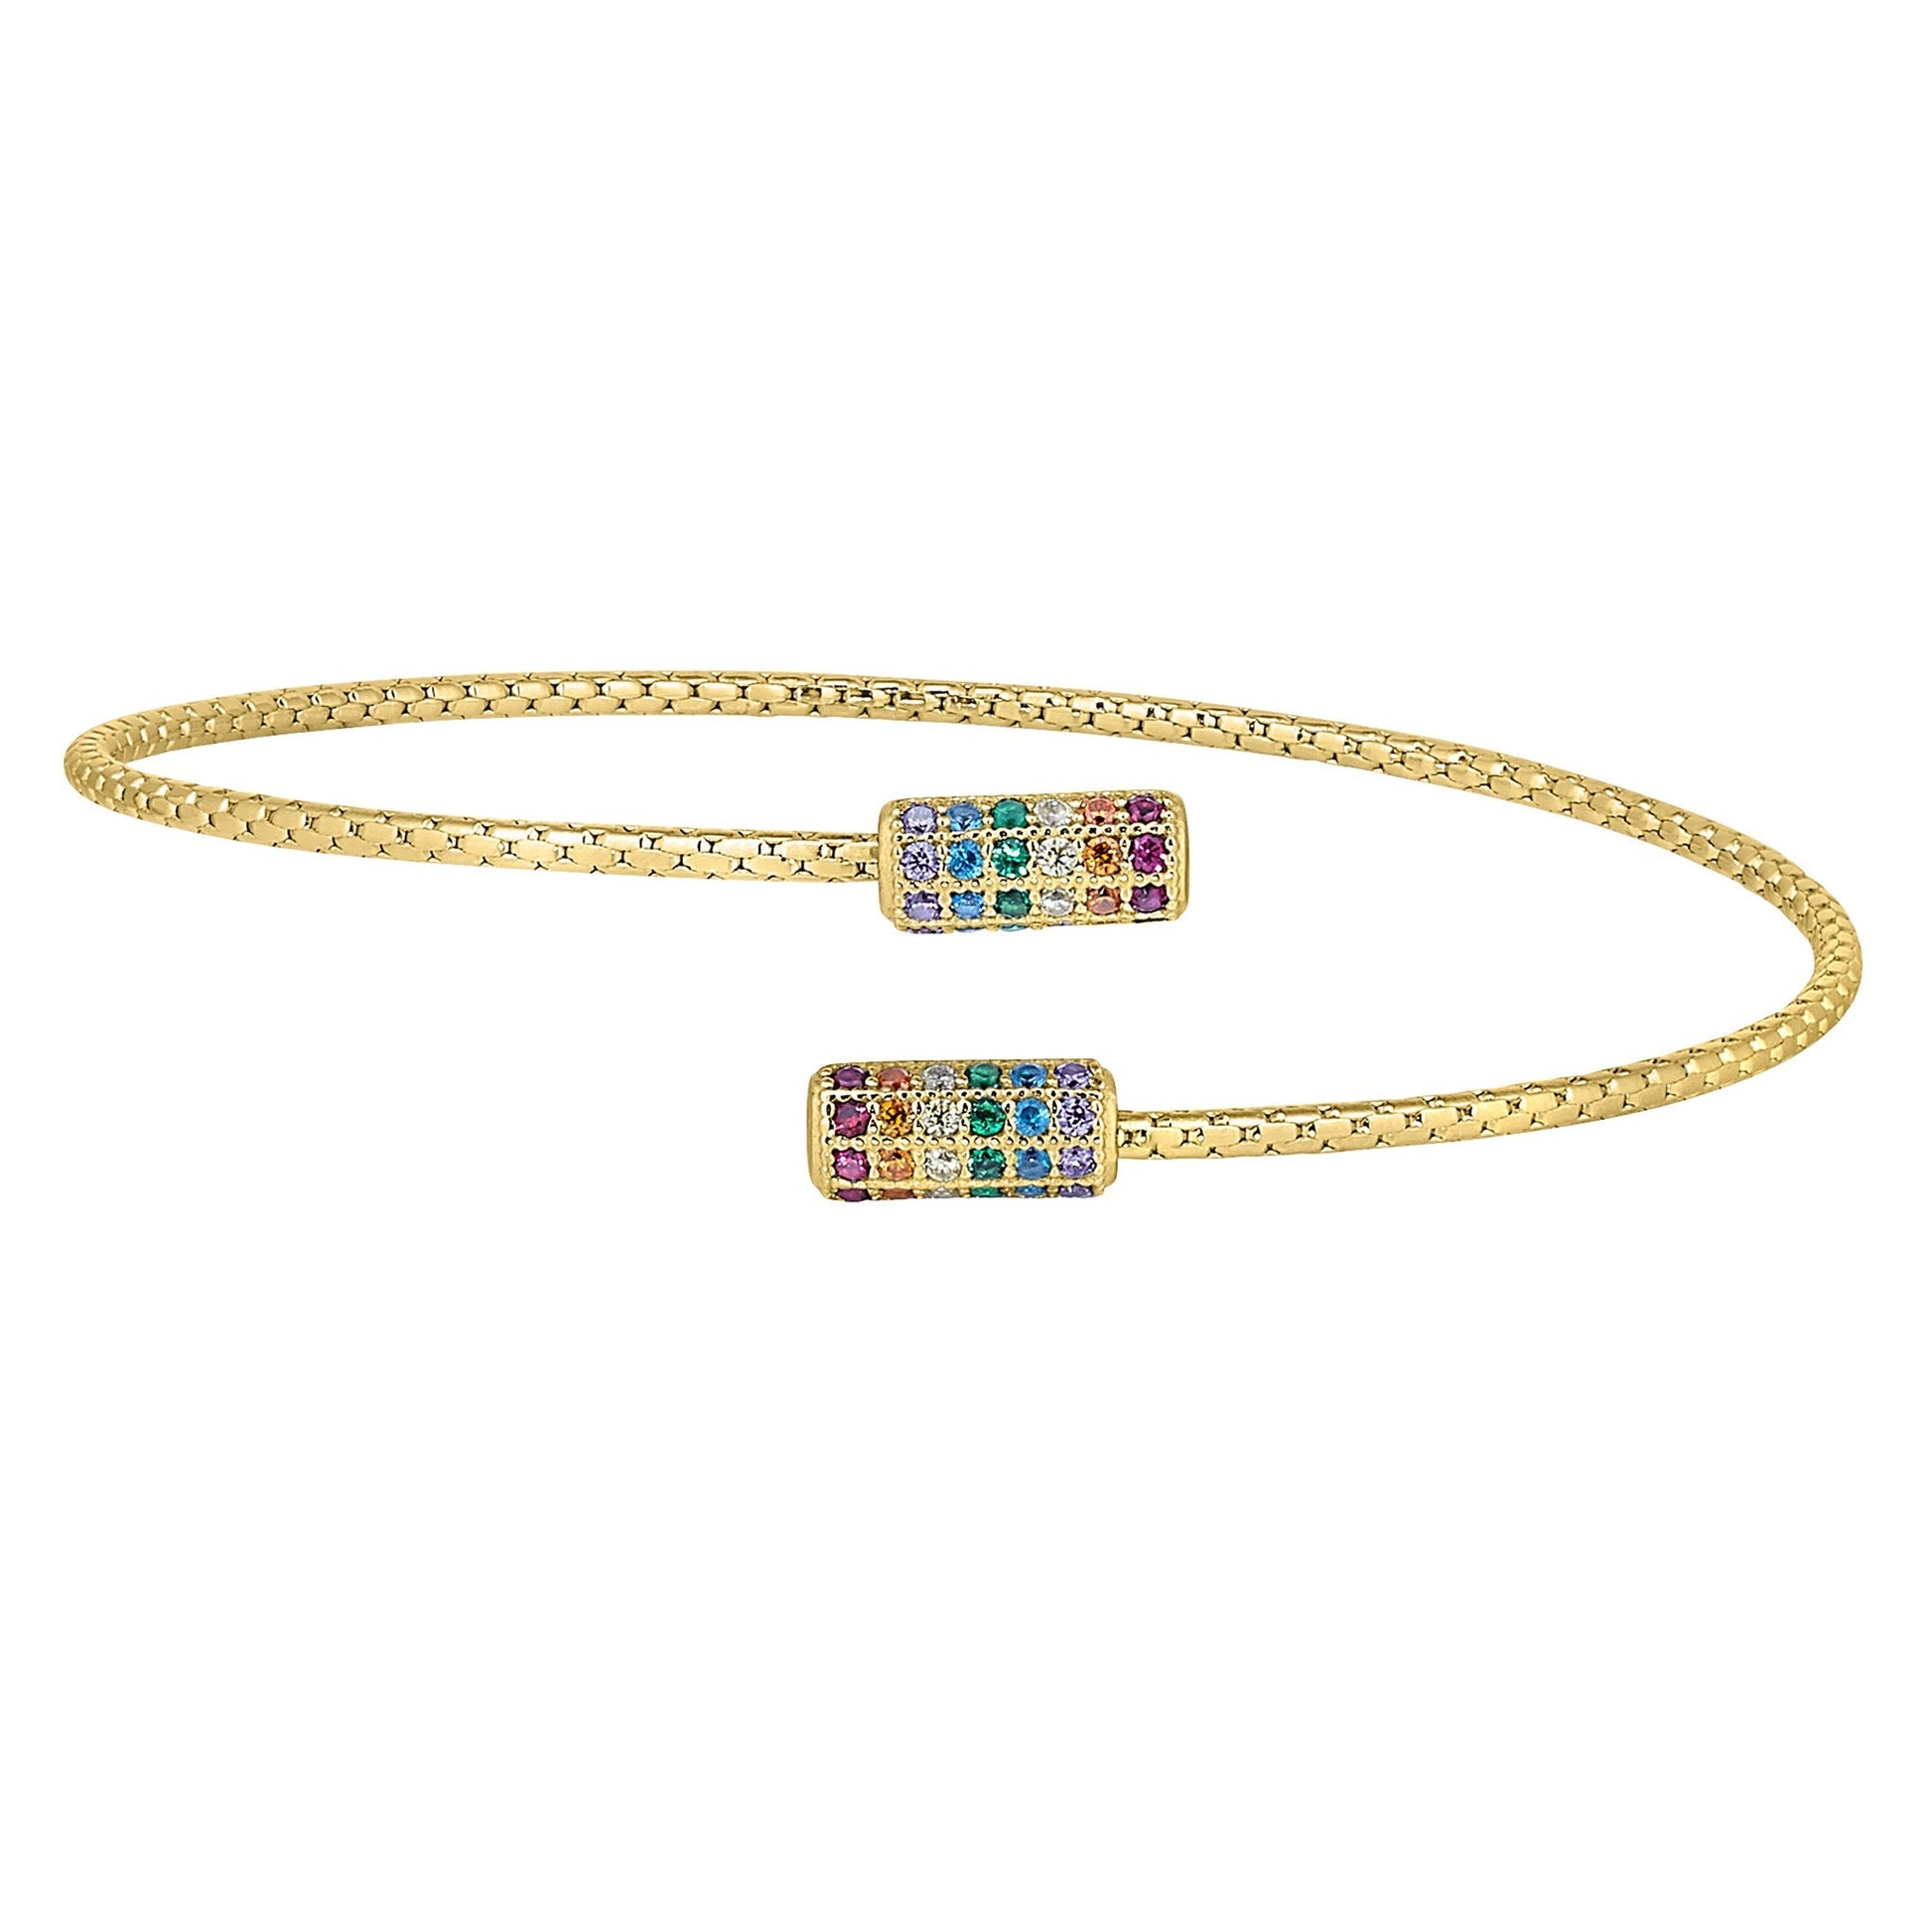 A rainbow negative space spiral wrap cable bracelet displayed on a neutral white background.